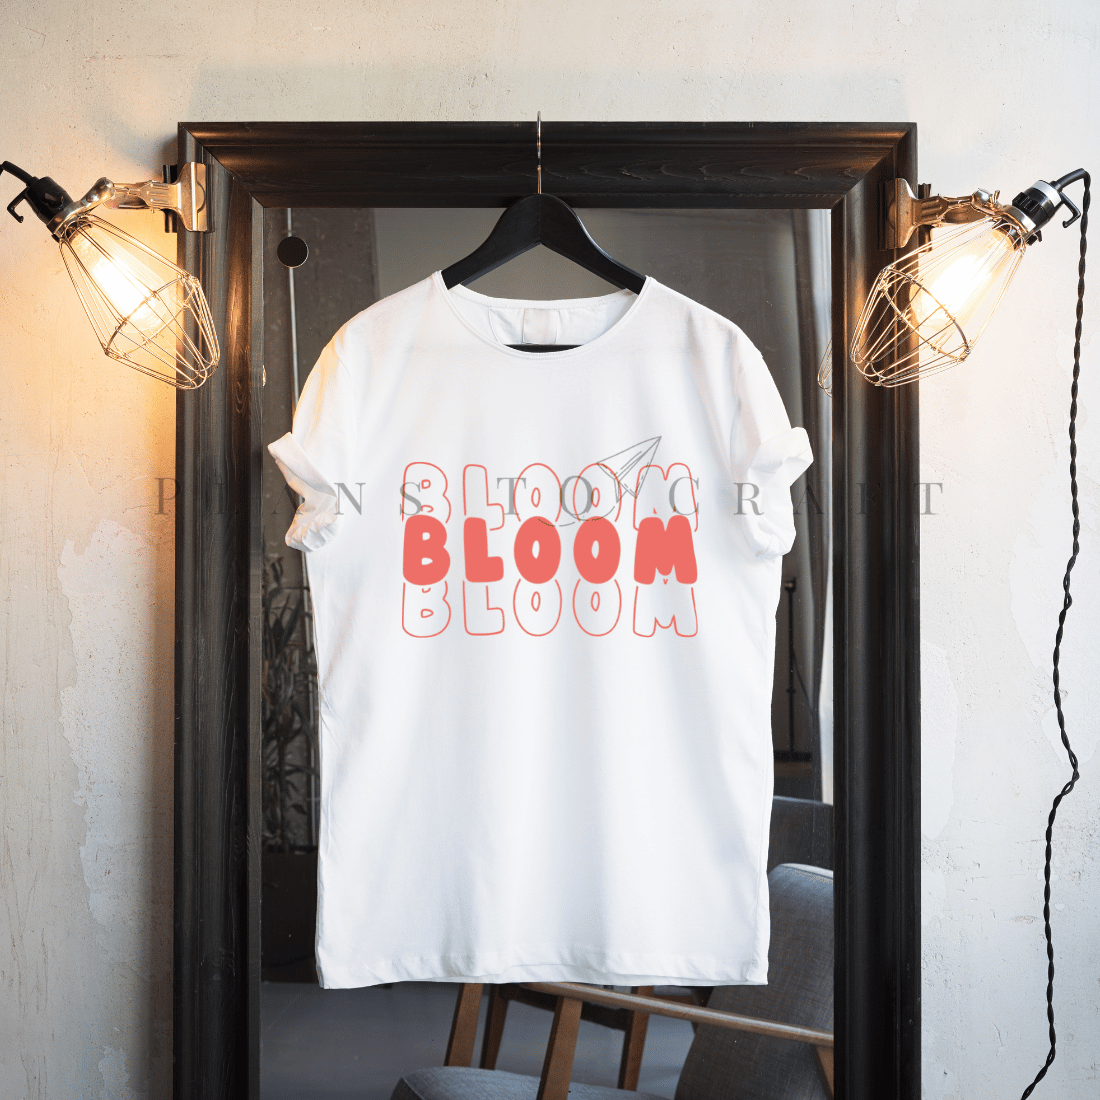 T - shirt that says bloom bloom on it hangs in front of a mirror.